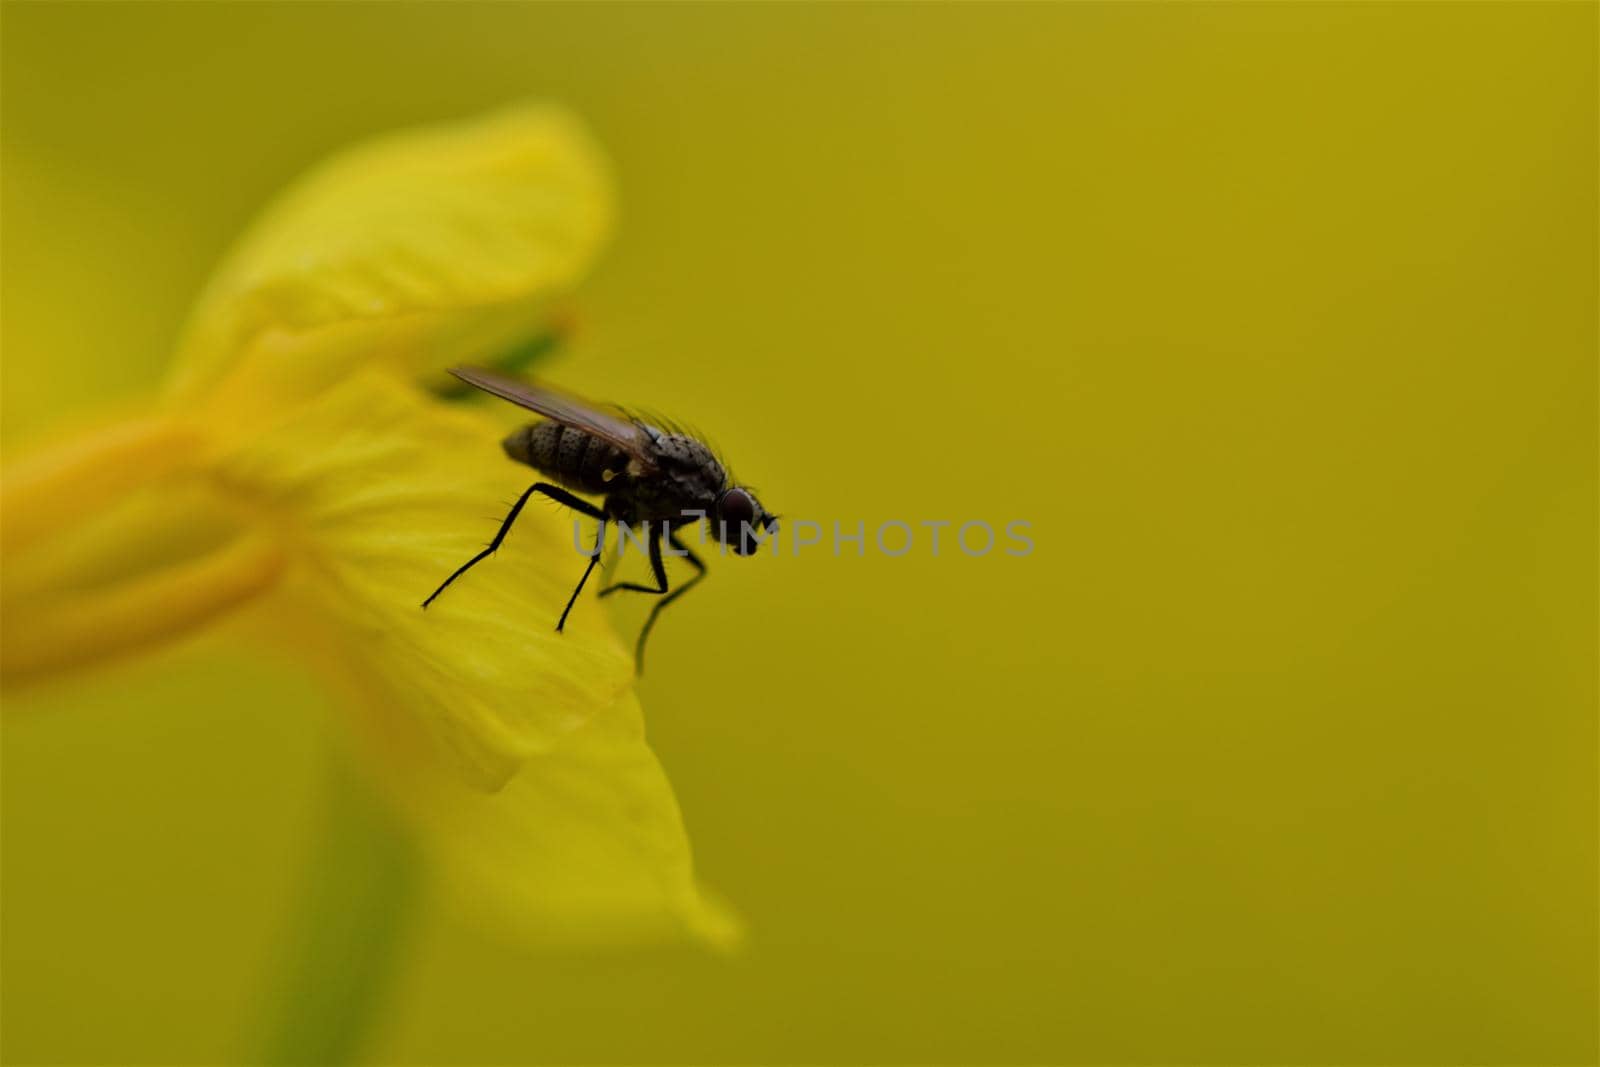 Black fly on a yellow rapeseed flower as a close up by Luise123